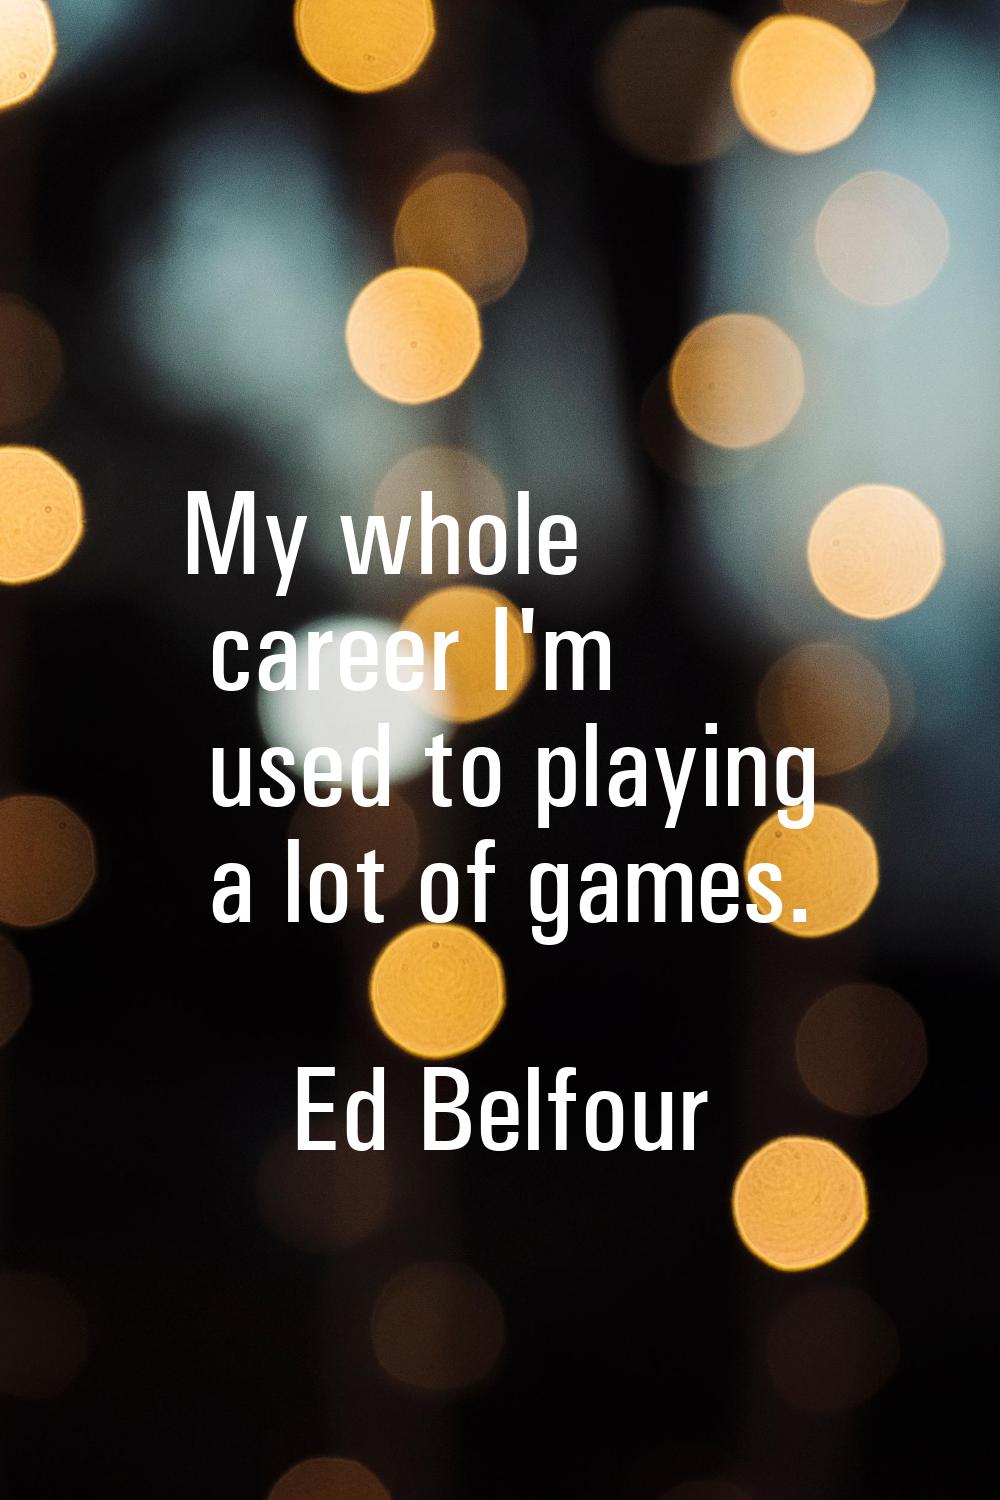 My whole career I'm used to playing a lot of games.